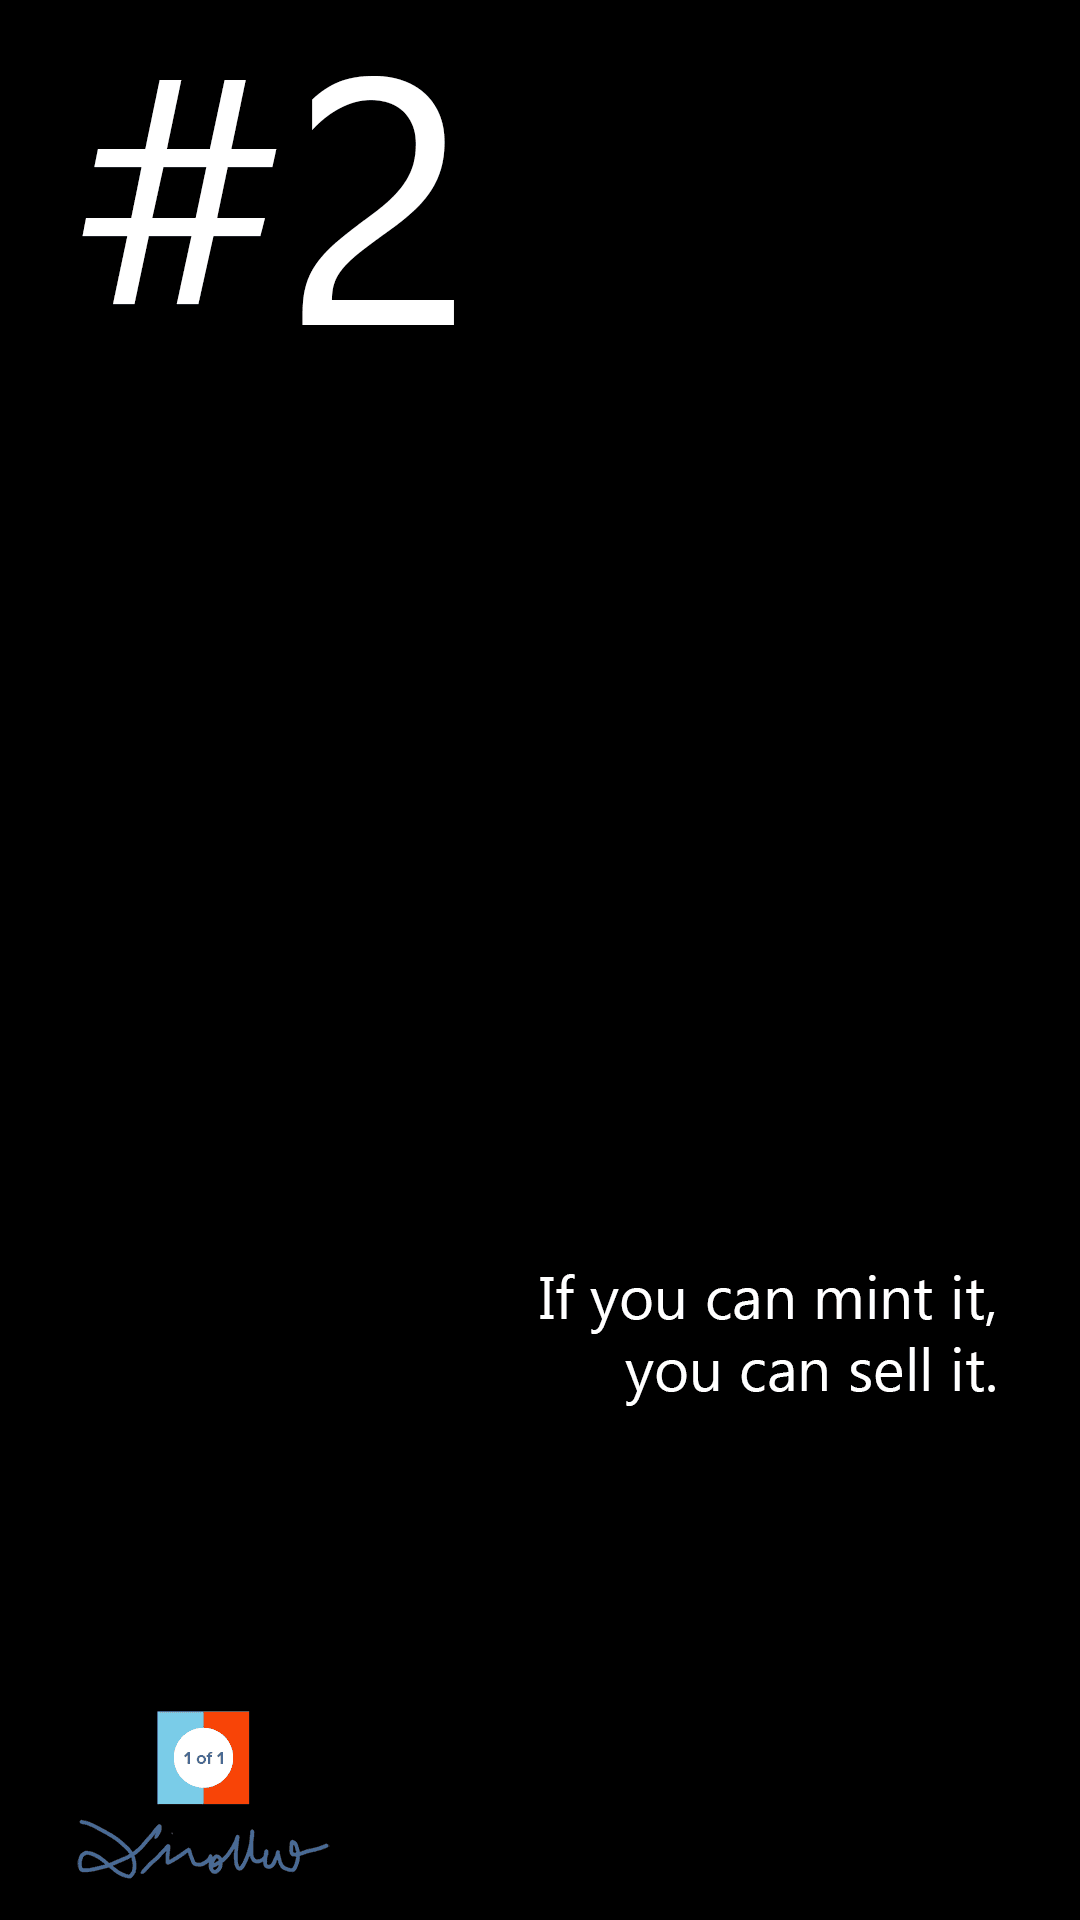 If you can mint it, you can sell it - No. 2